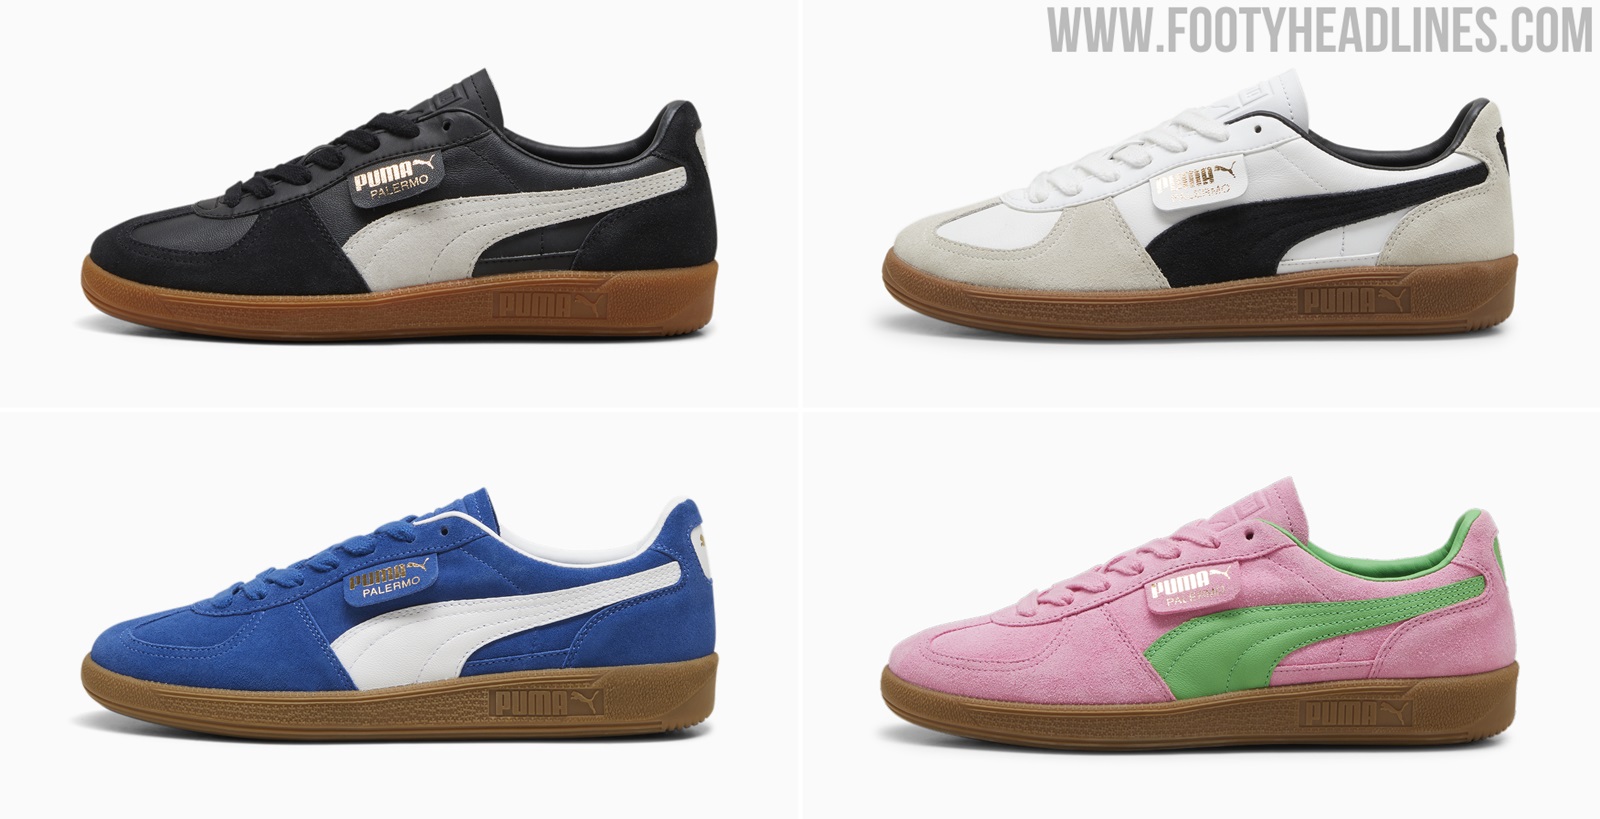 An icon of soccer culture reimagined: Puma Palermo sneaker hits SA